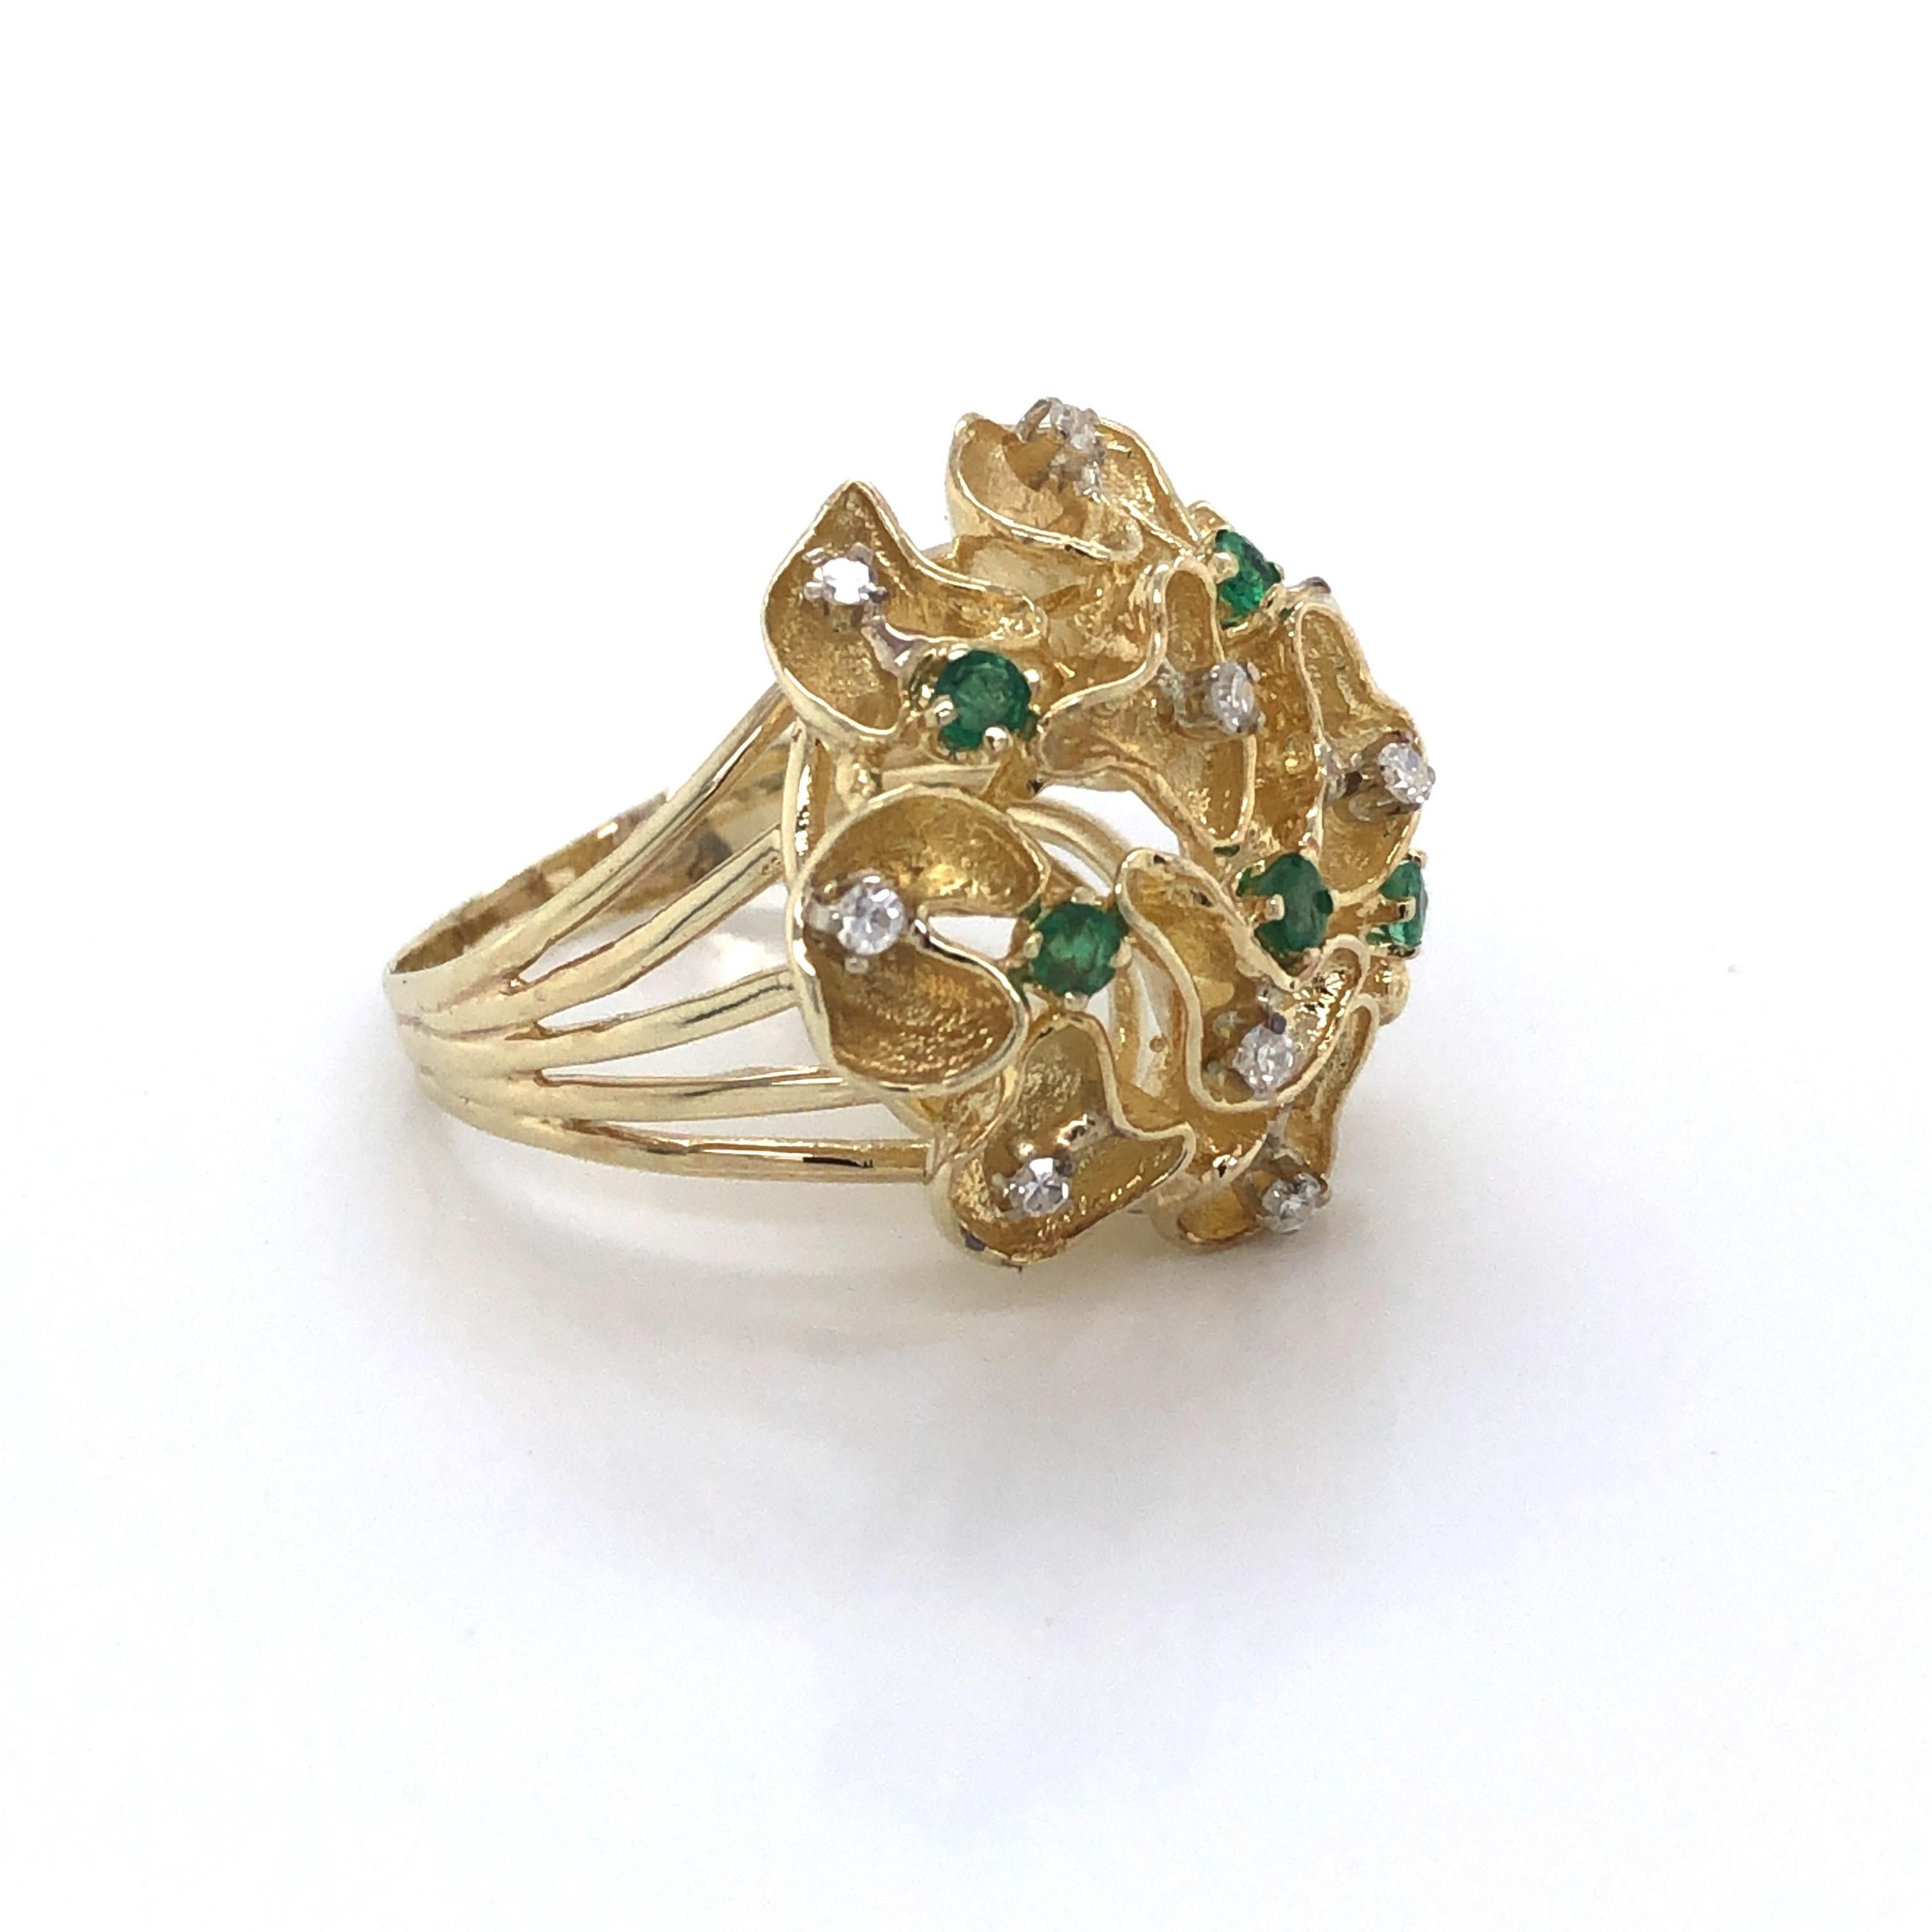 Lacey floral inspired buds of yellow gold are illuminated with emerald and diamonds accents to create this outstanding 1960's pop art style ring. Made of fourteen karat 14k yellow gold with eleven .01 carat diamonds, .11 carat total weight and five